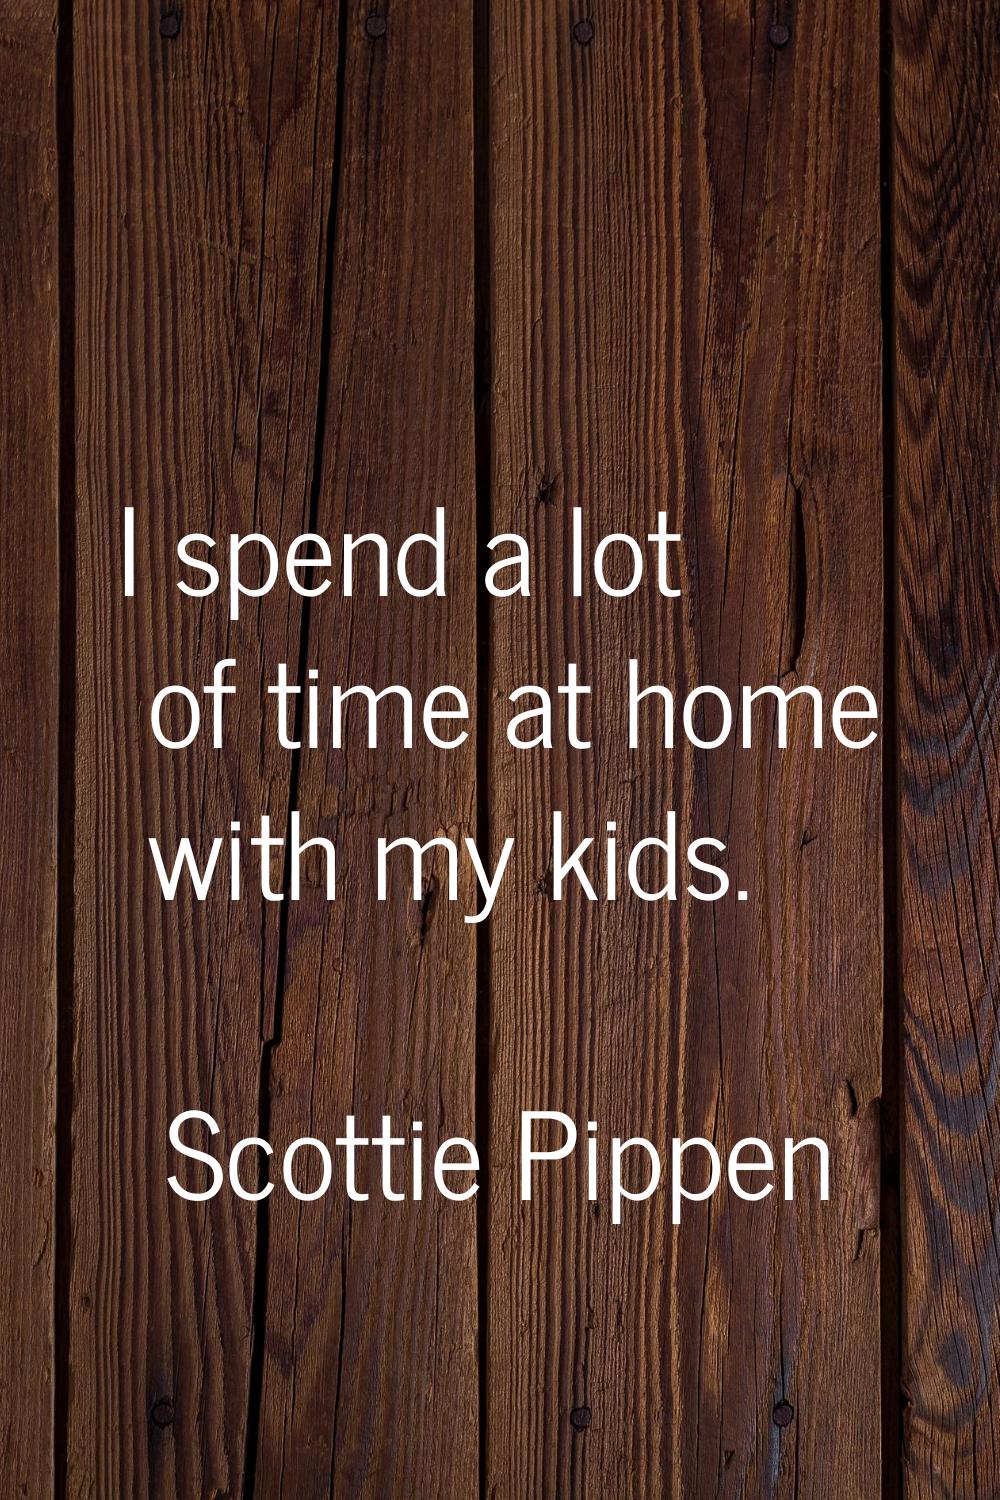 I spend a lot of time at home with my kids.